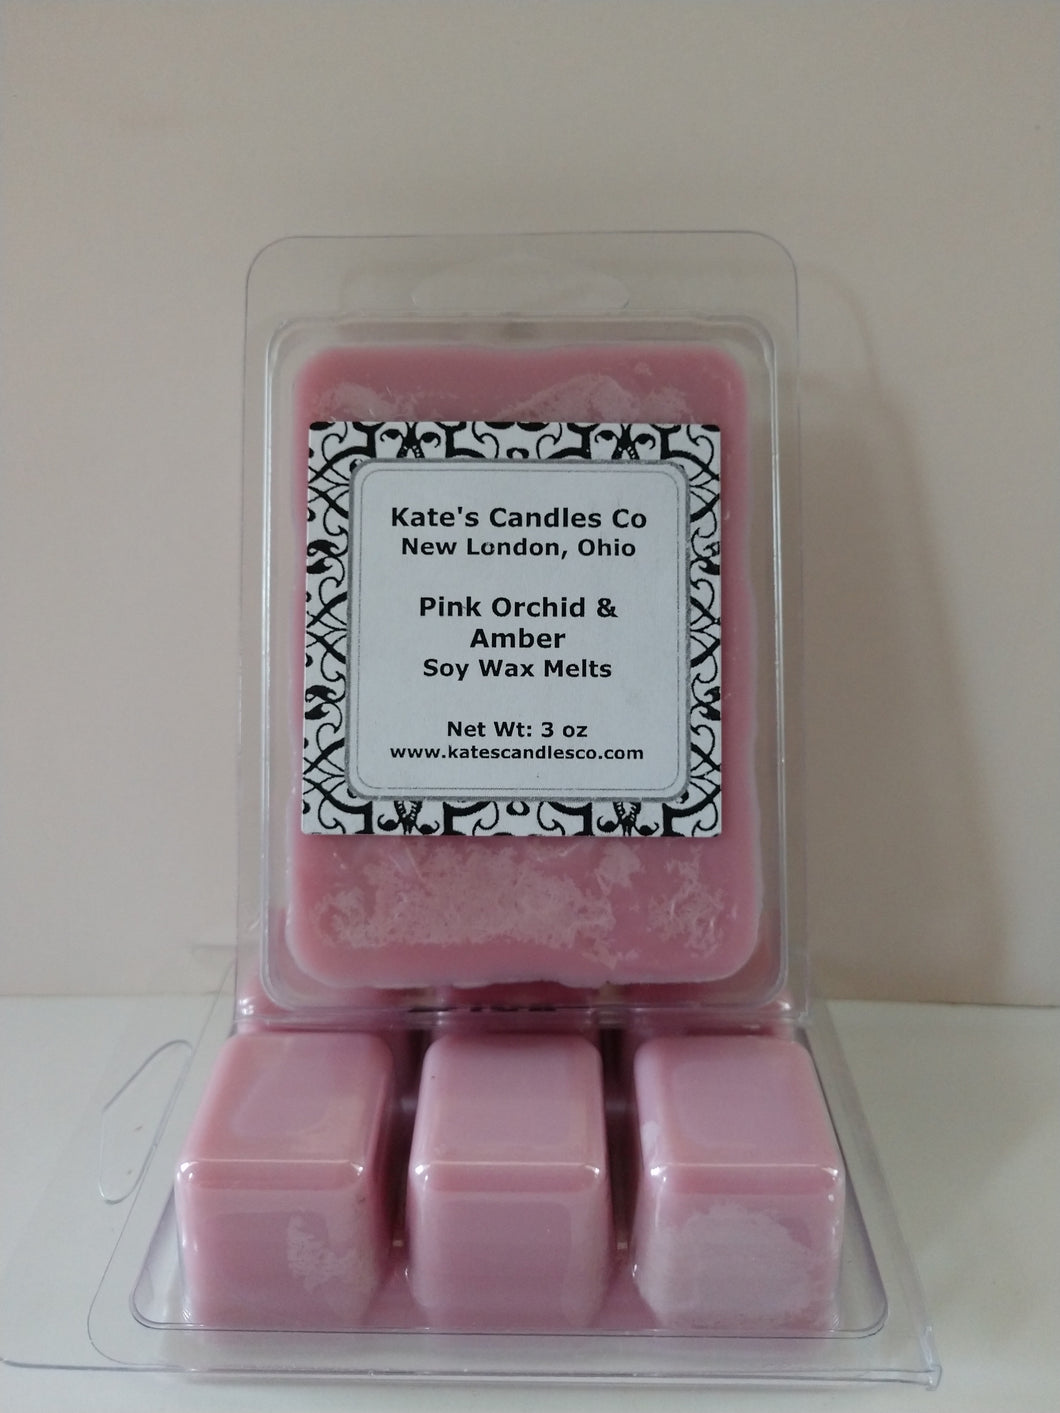 Pink Orchid and Amber Soy Wax Melts - Kate's Candles Co. Soy Candles